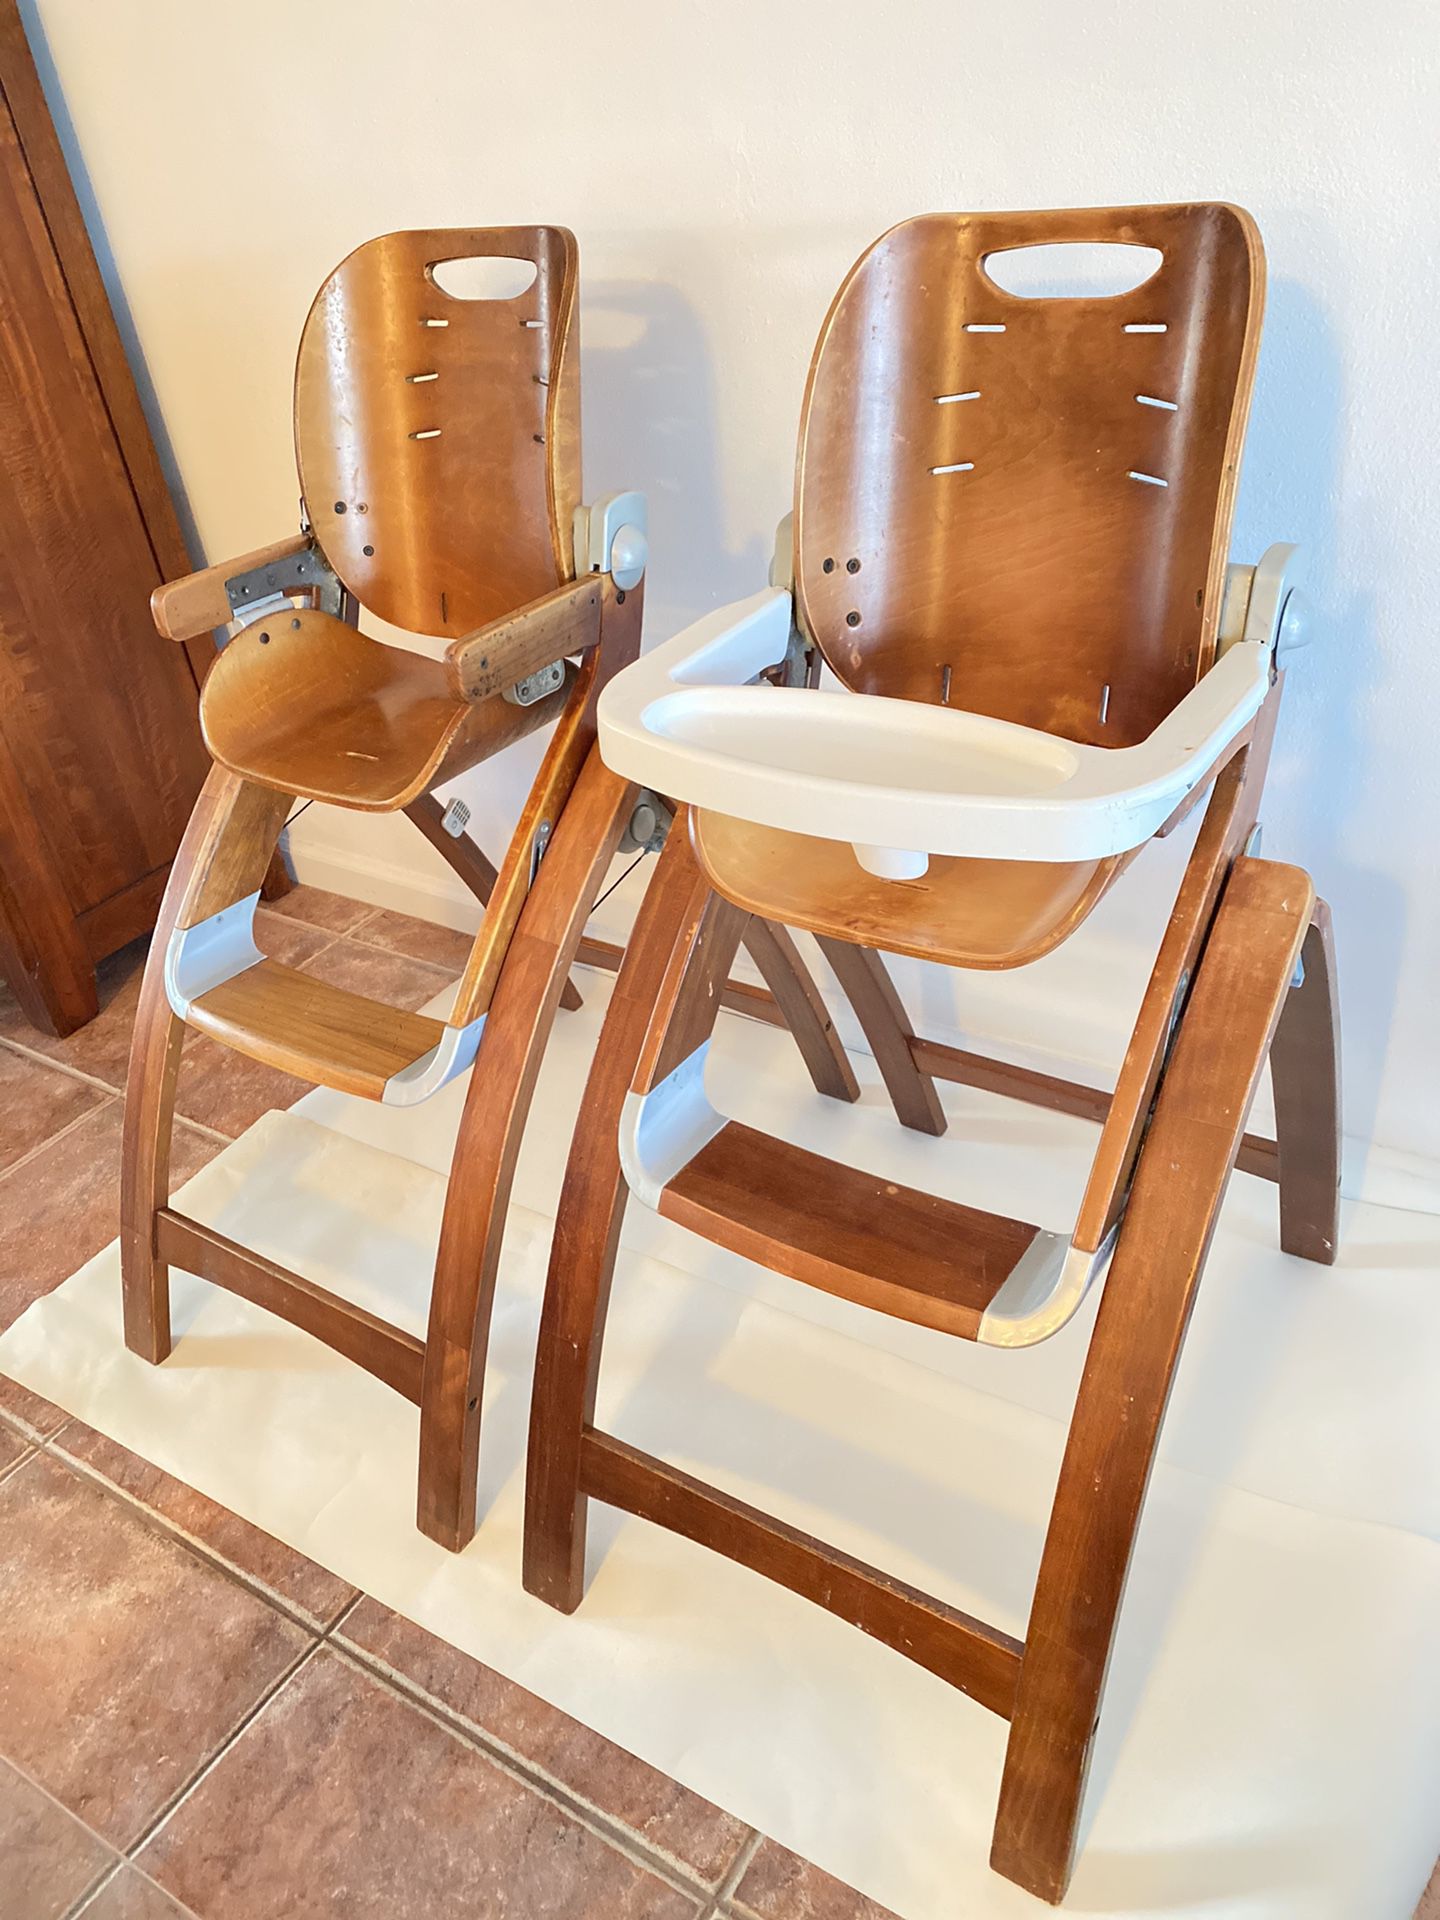 Summer Infant Bentwood High Chair For Babies, Toddlers And Preschoolers 